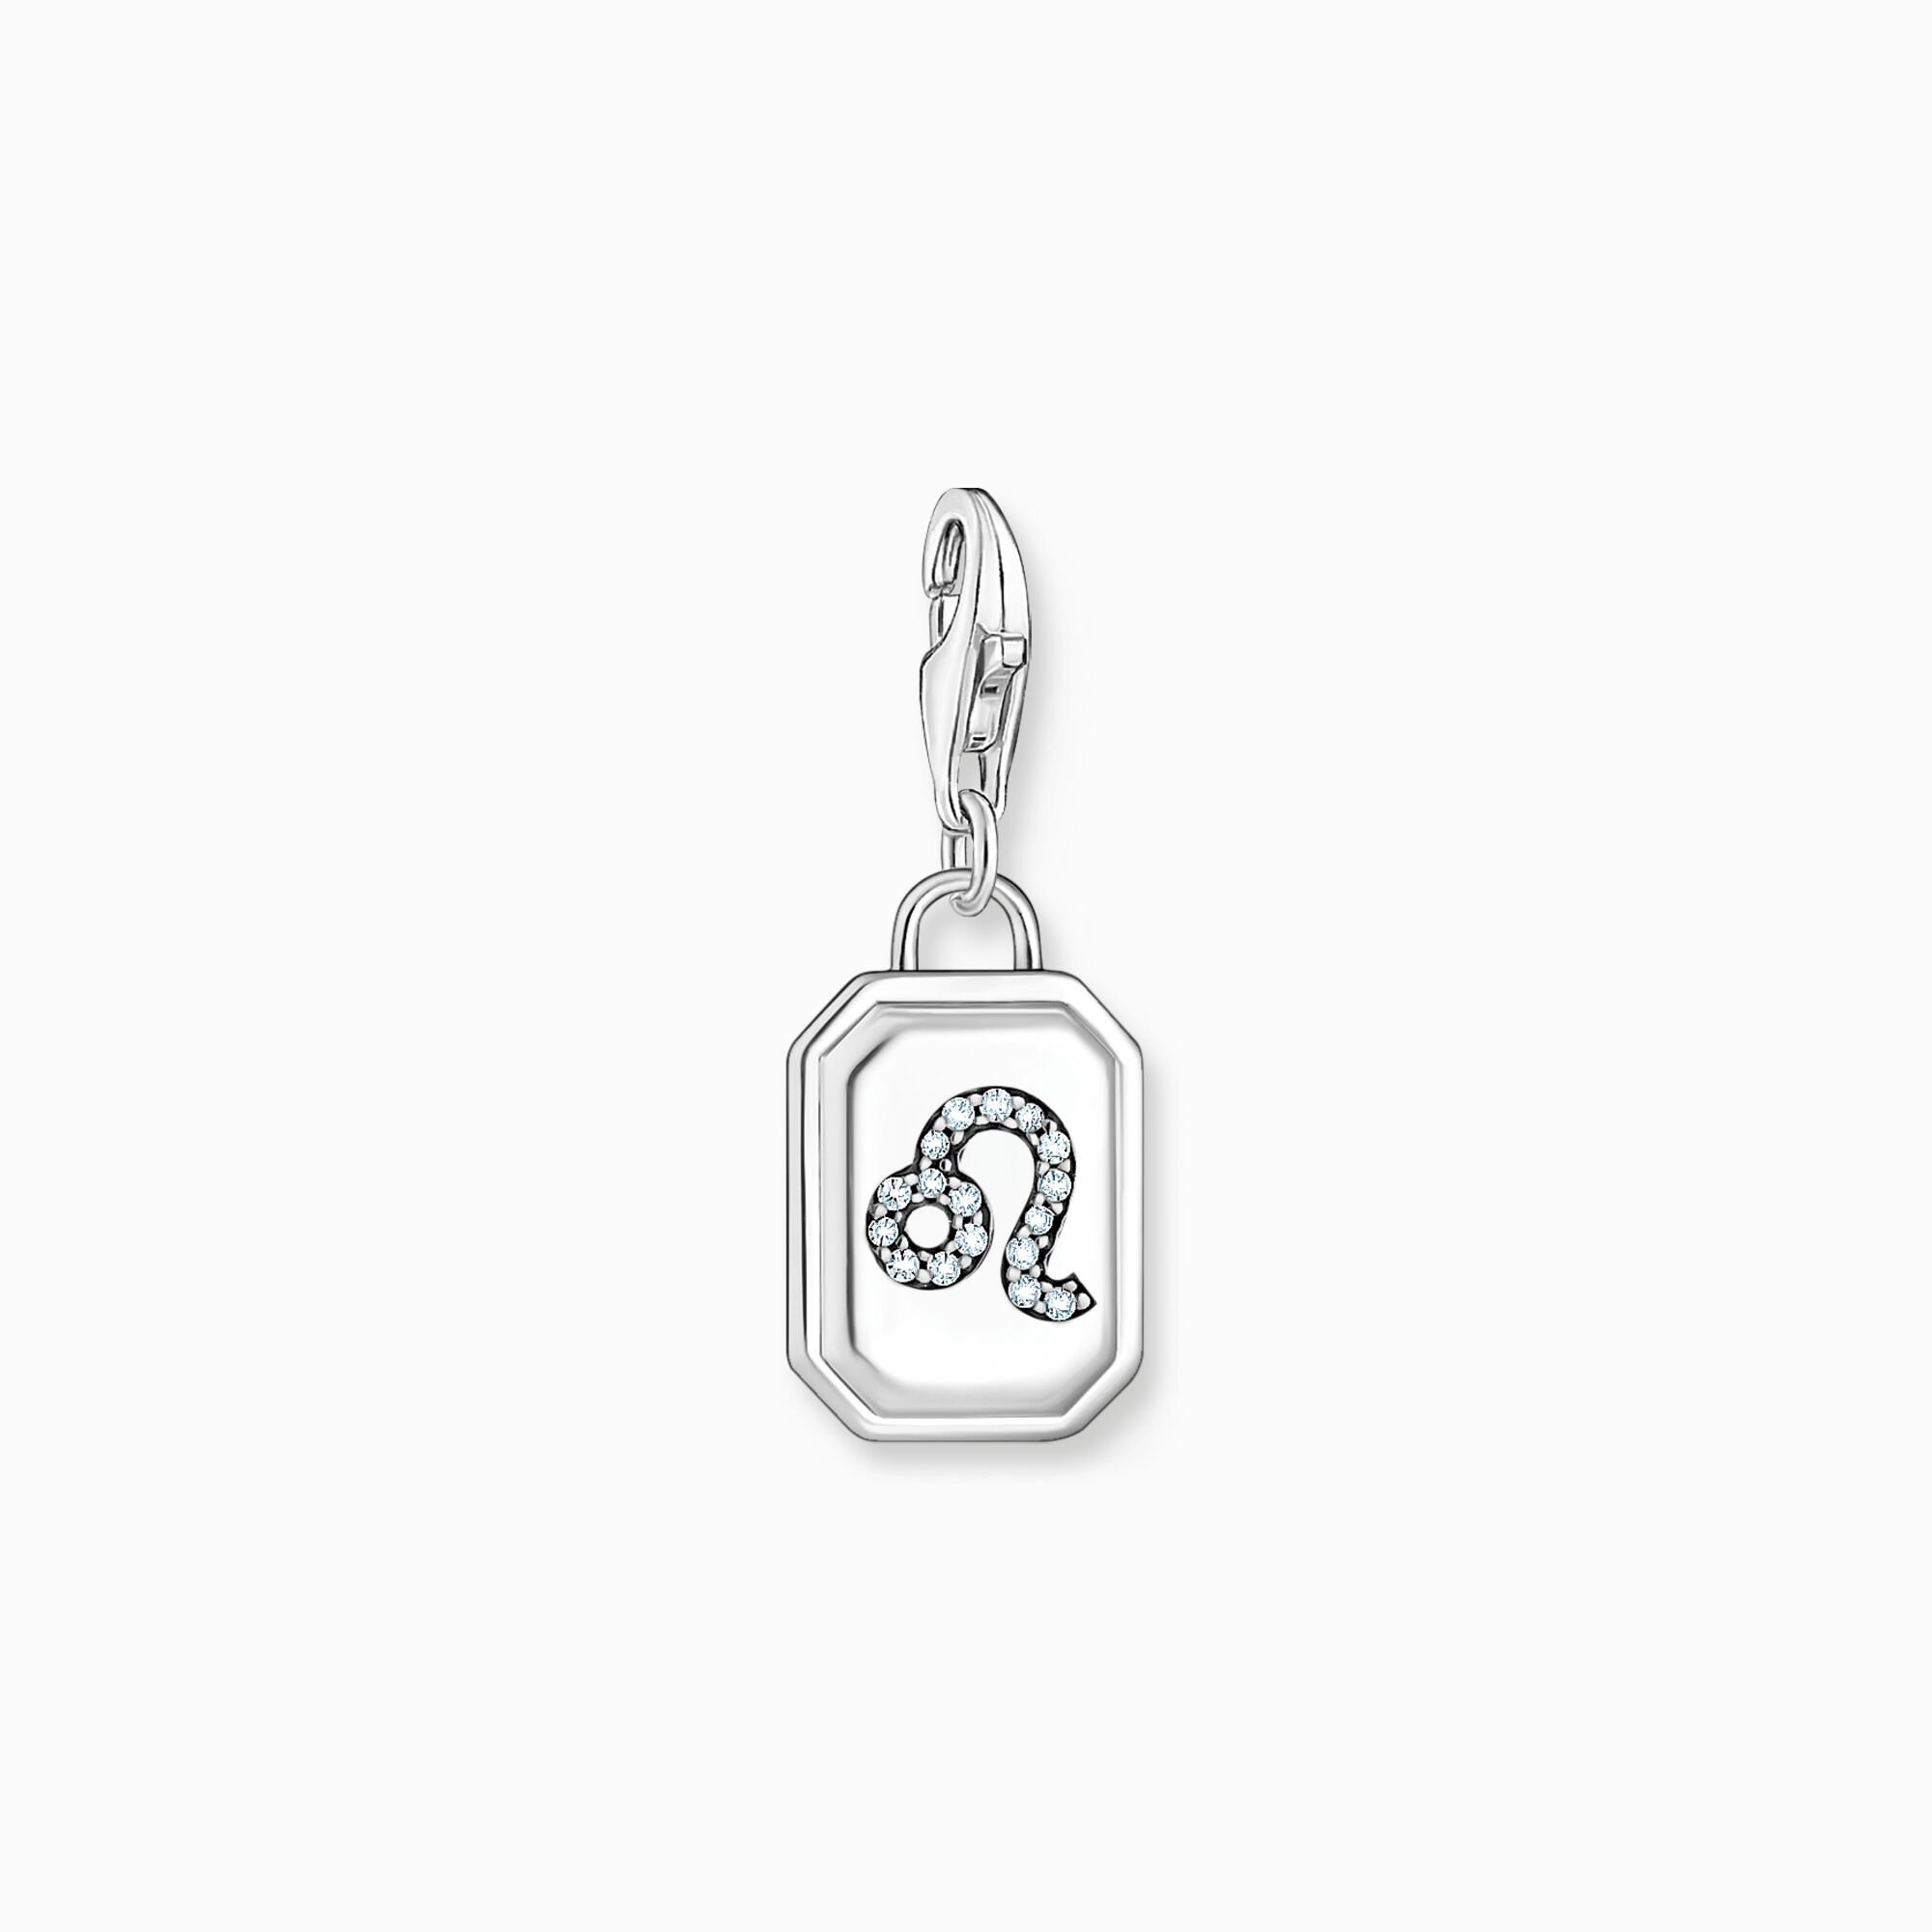 Silver charm pendant zodiac sign Leo with zirconia from the Charm Club collection in the THOMAS SABO online store